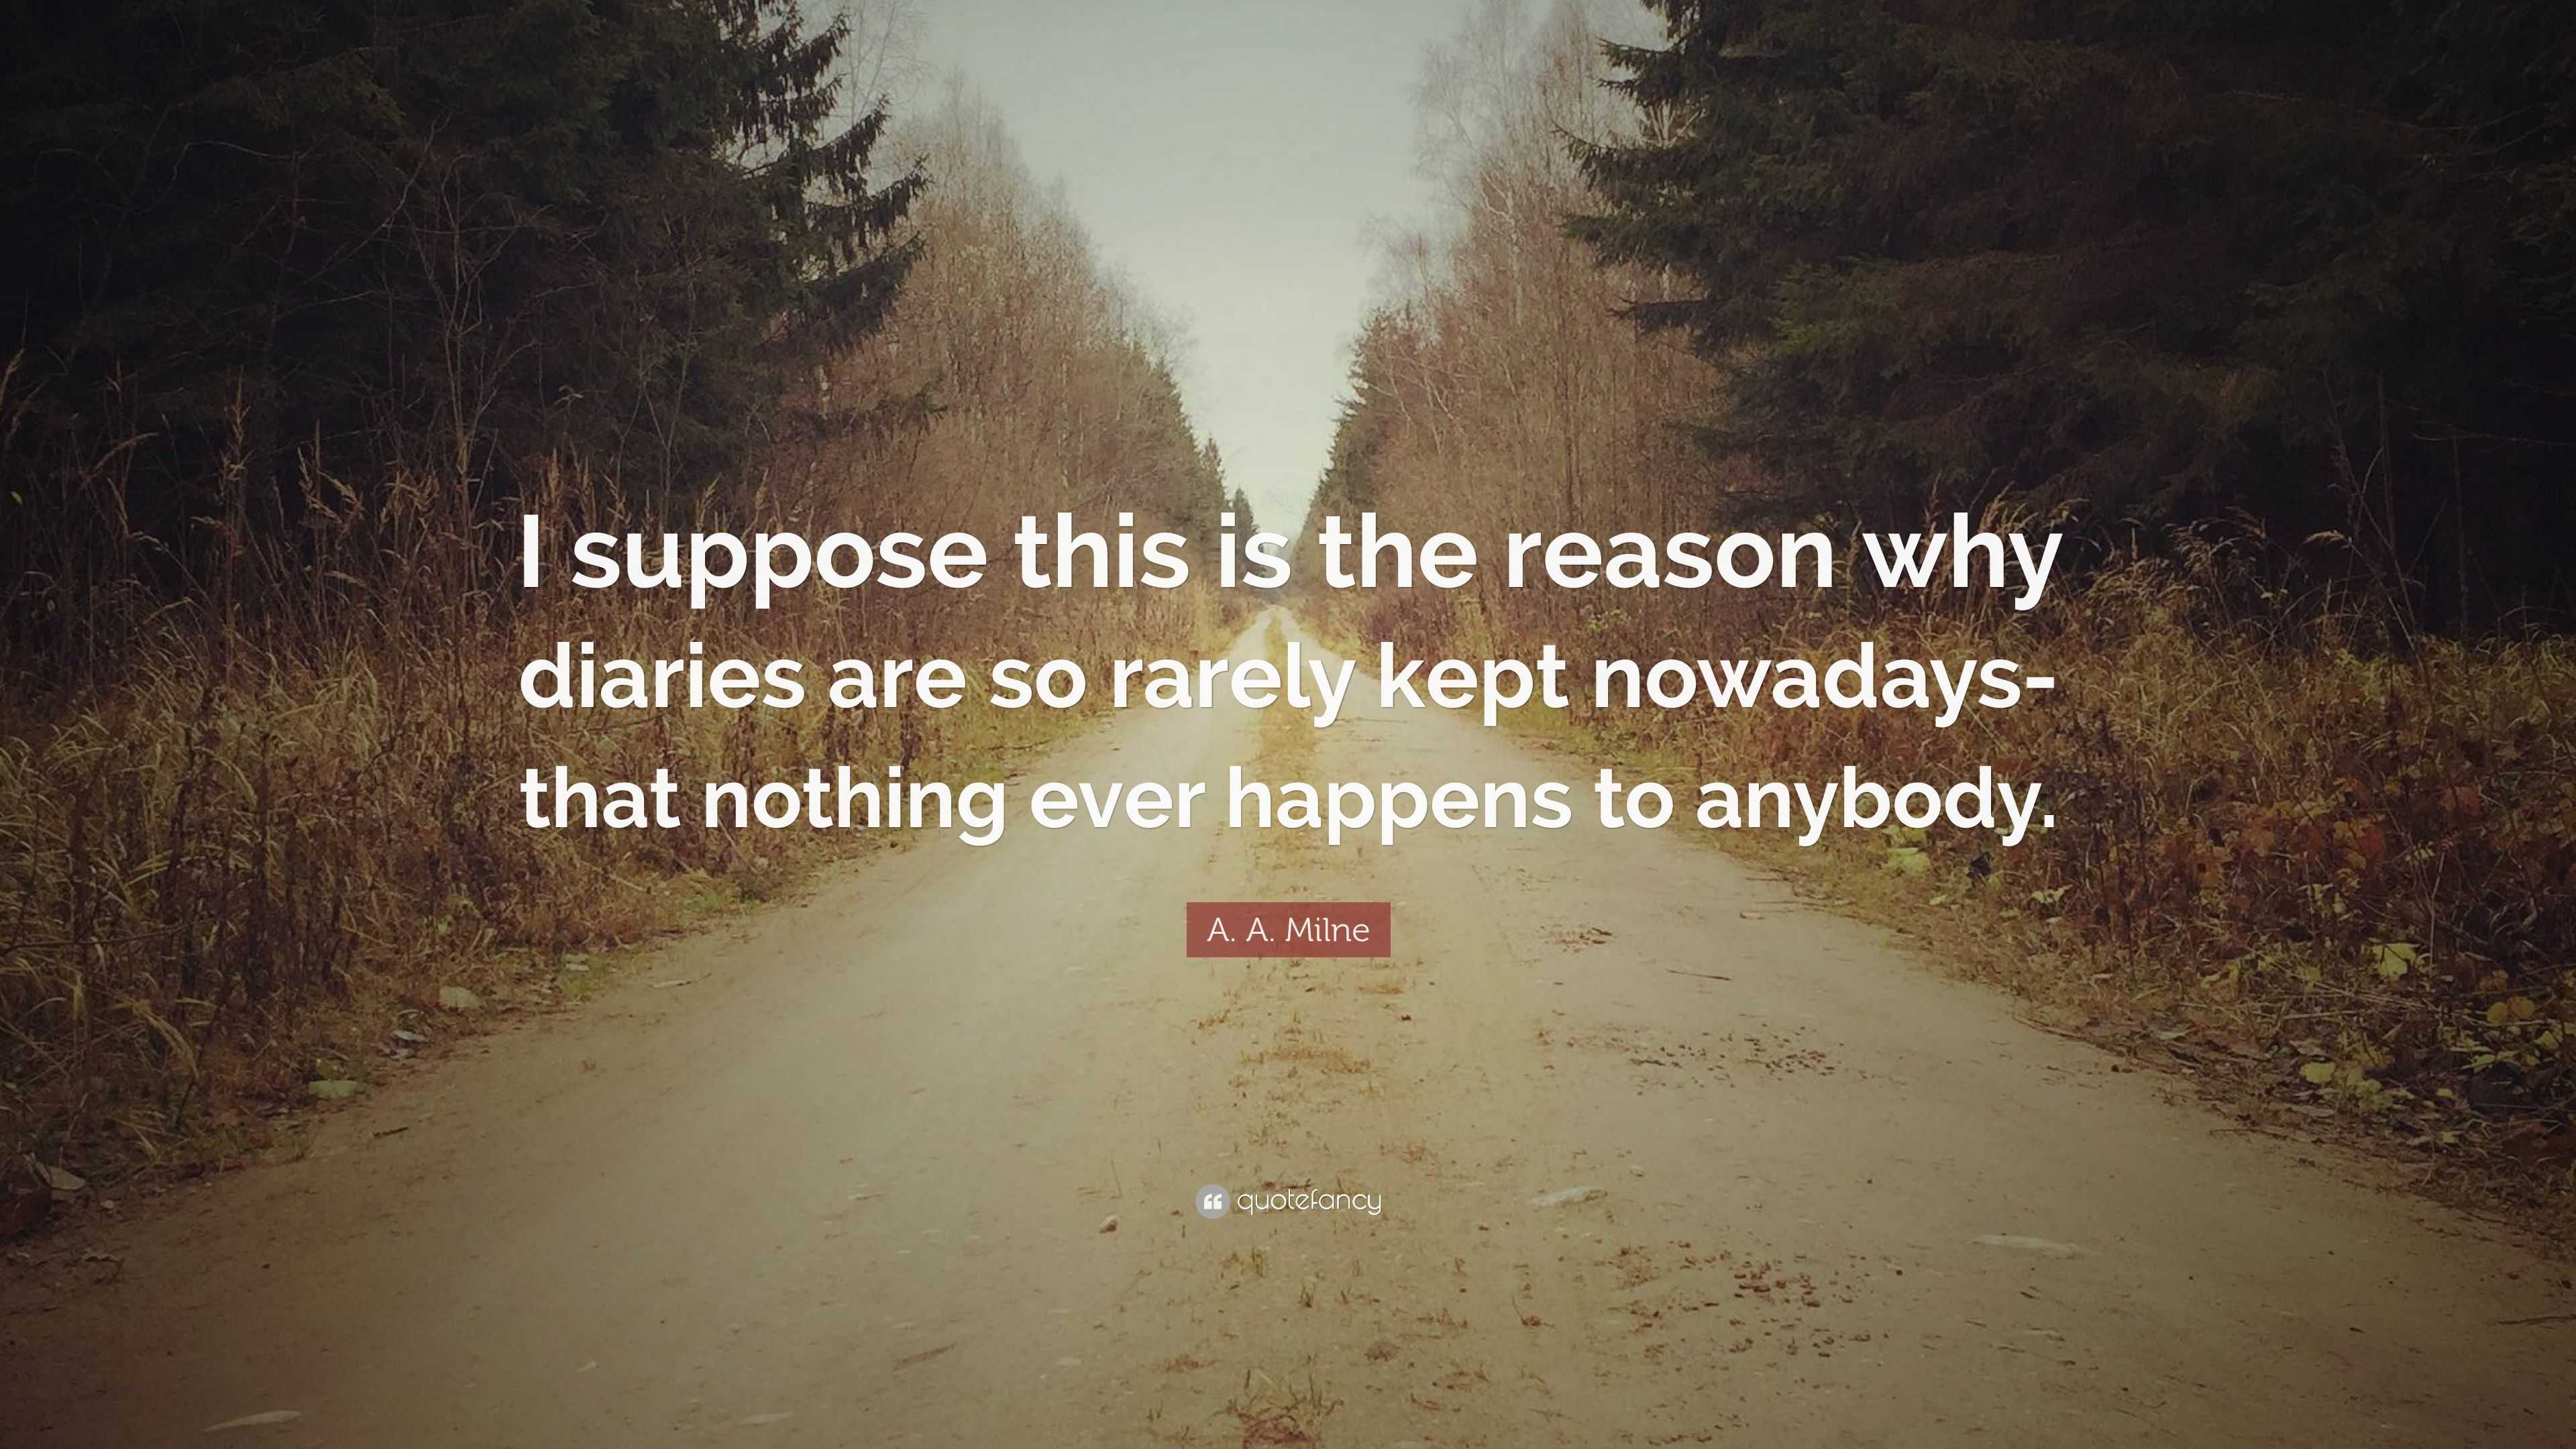 A. A. Milne Quote: “I suppose this is the reason why diaries are so